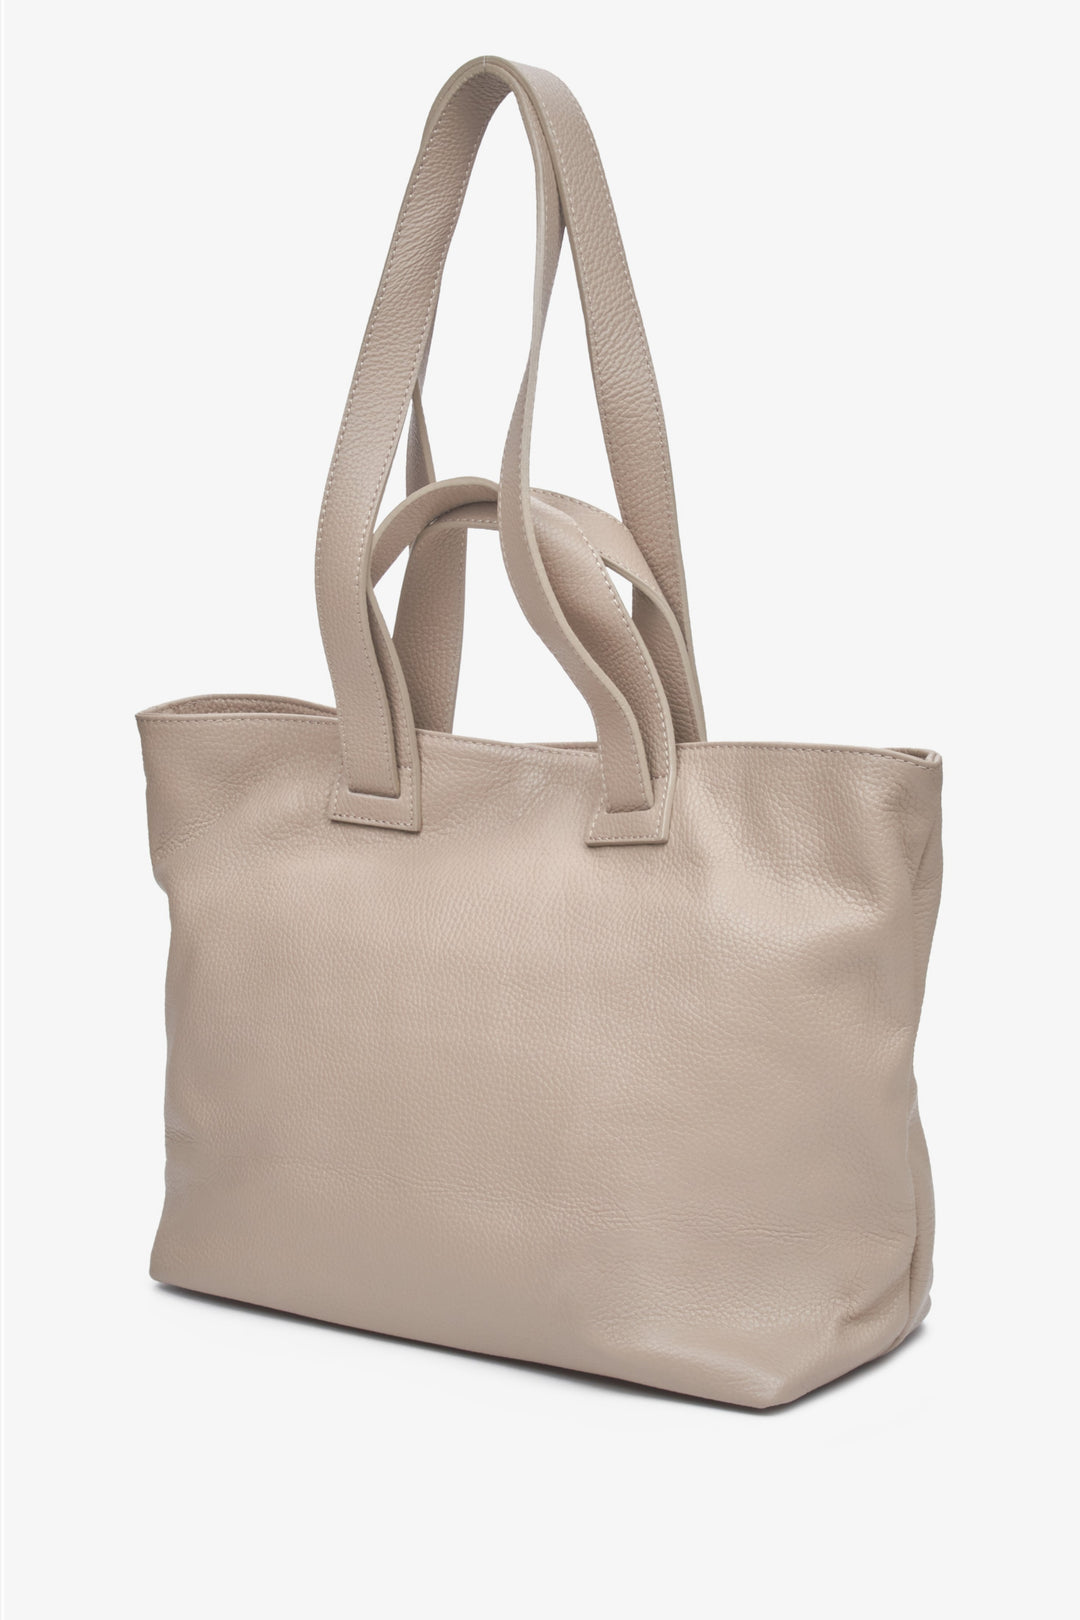 Beige large women's handbag made from genuine leather by Estro.